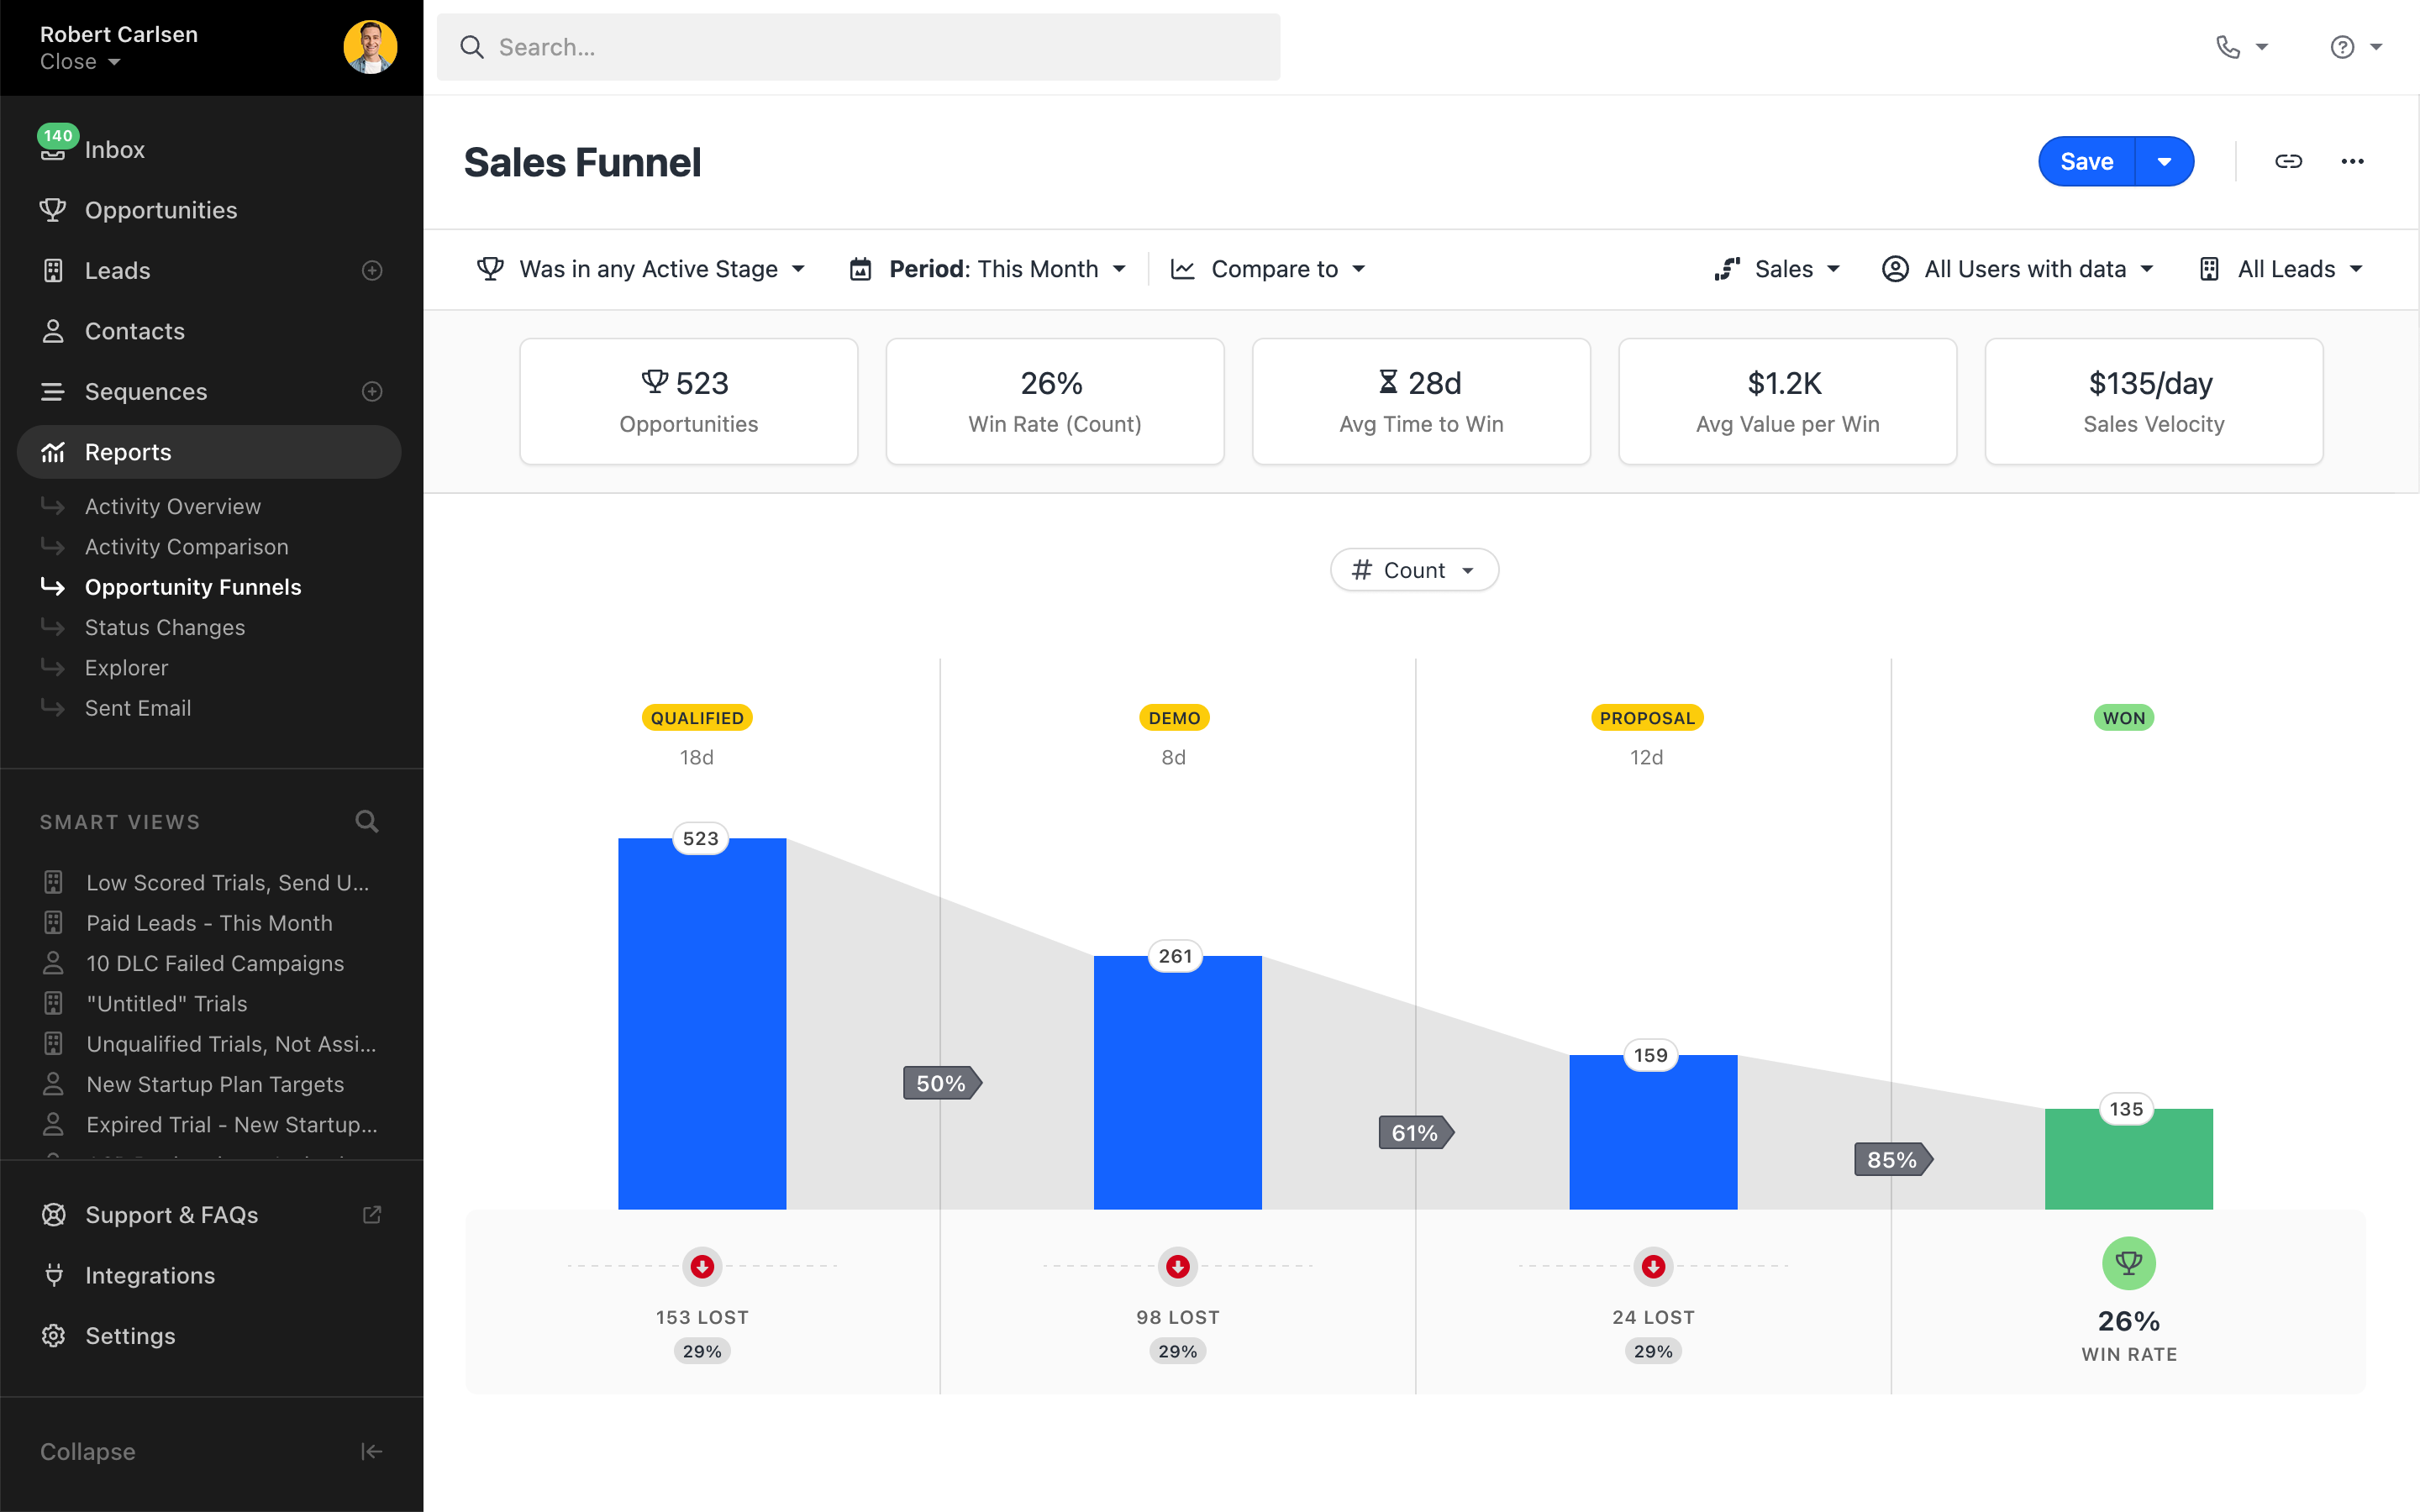 Opportunity funnels, for easy-to-use and customizable reports on your sales team's performance.